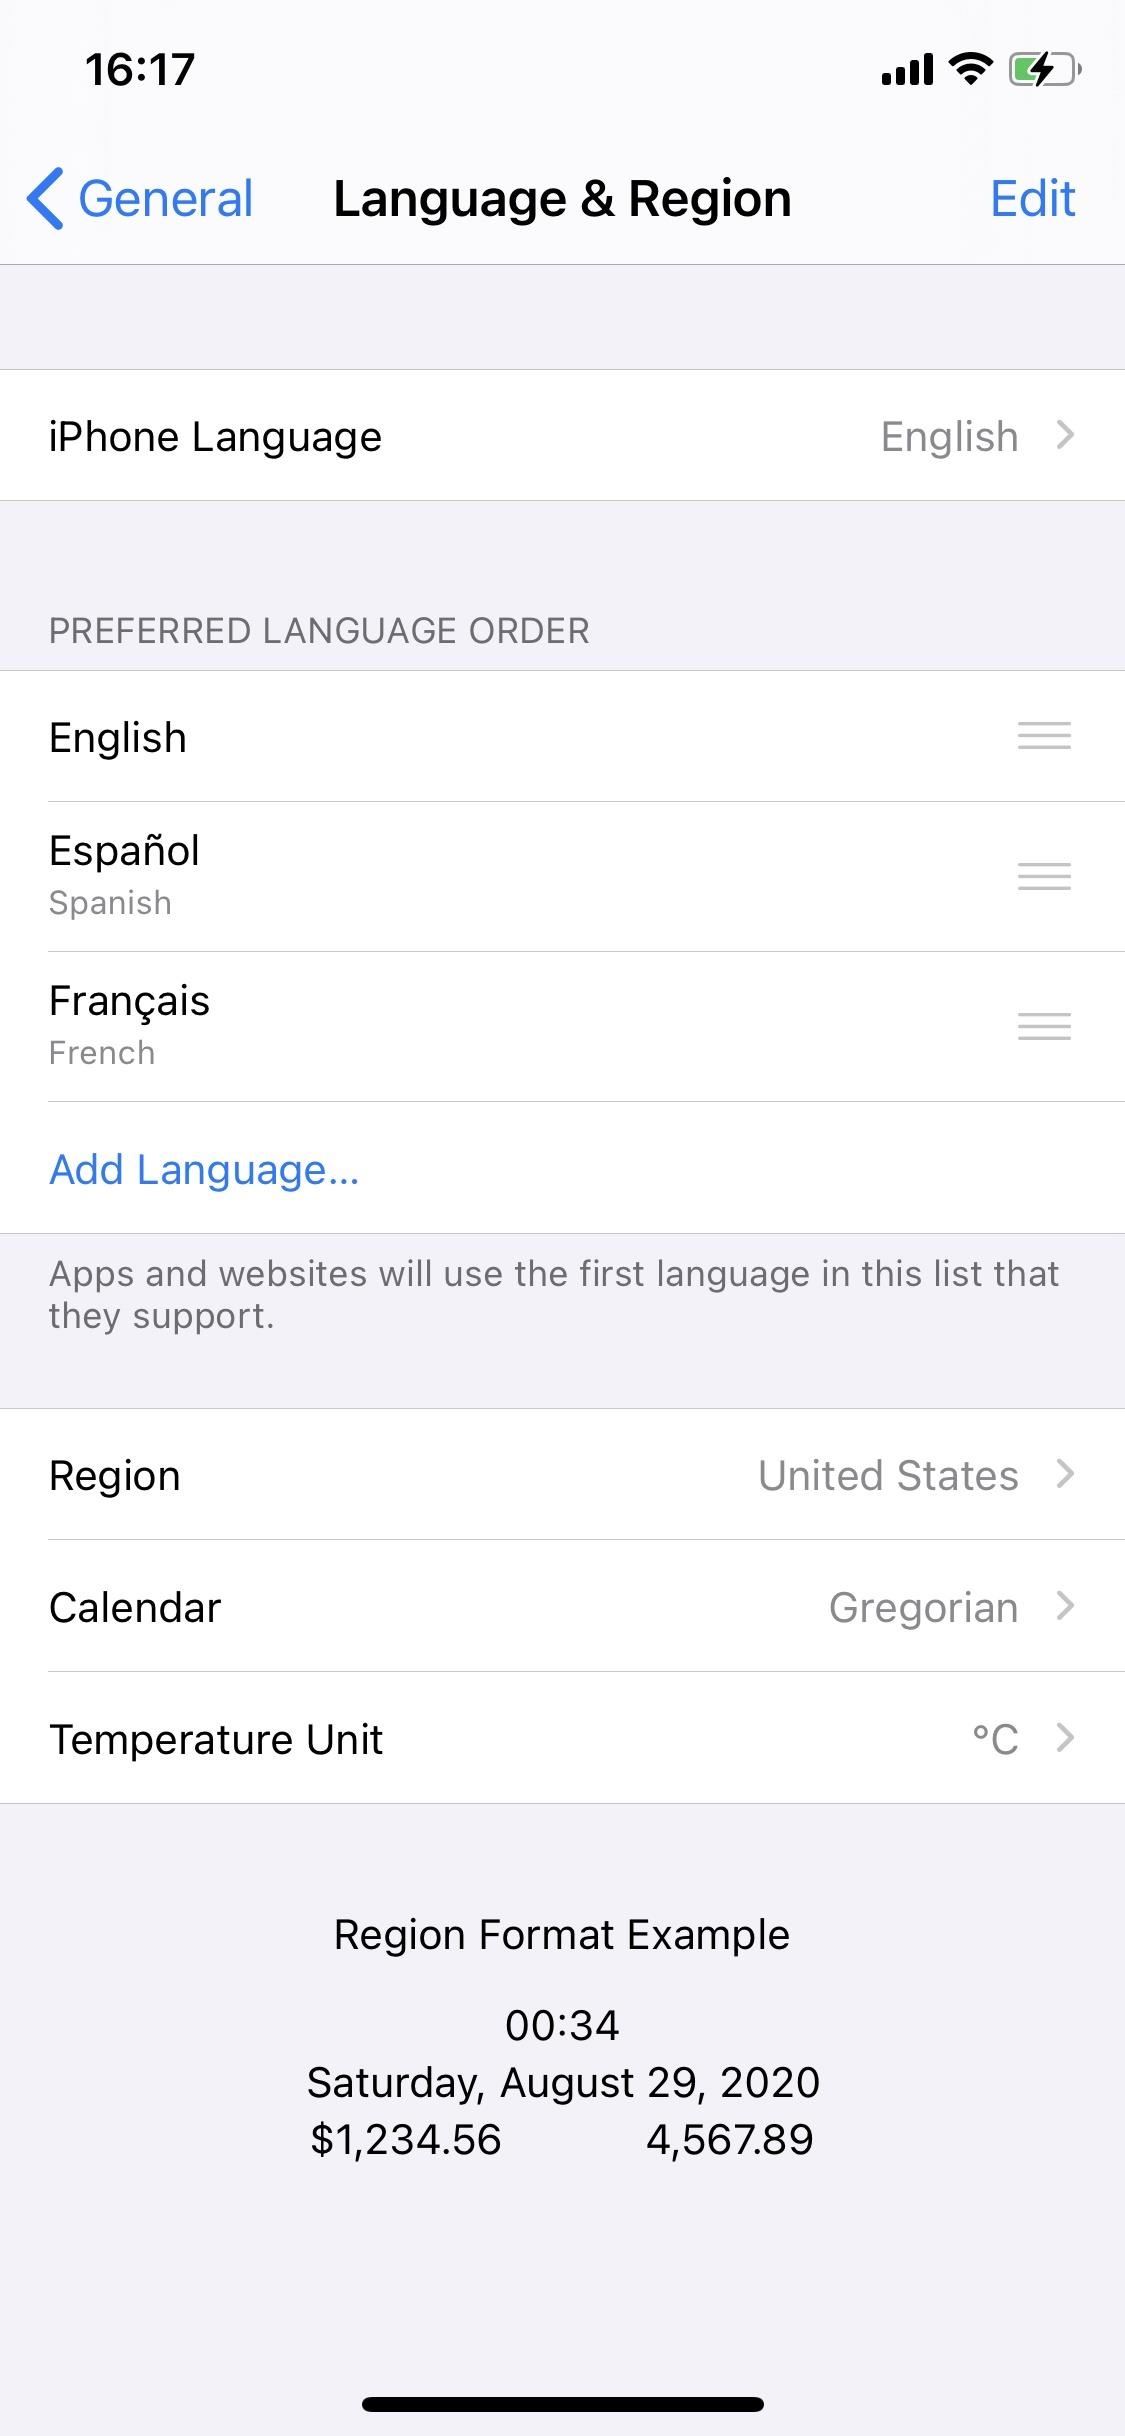 Translate Webpages in Safari to Another Language Using Apple's New Translation Tool